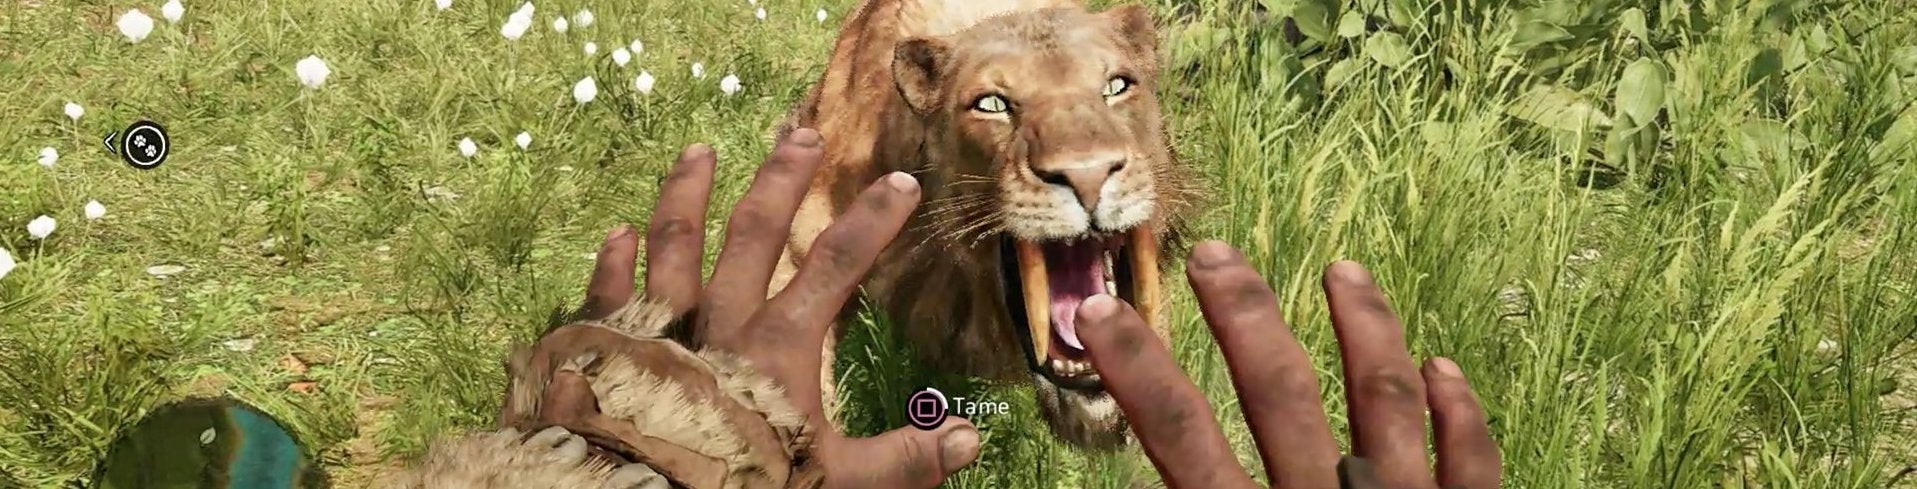 Image for Watch: You can tame wild animals in Far Cry Primal